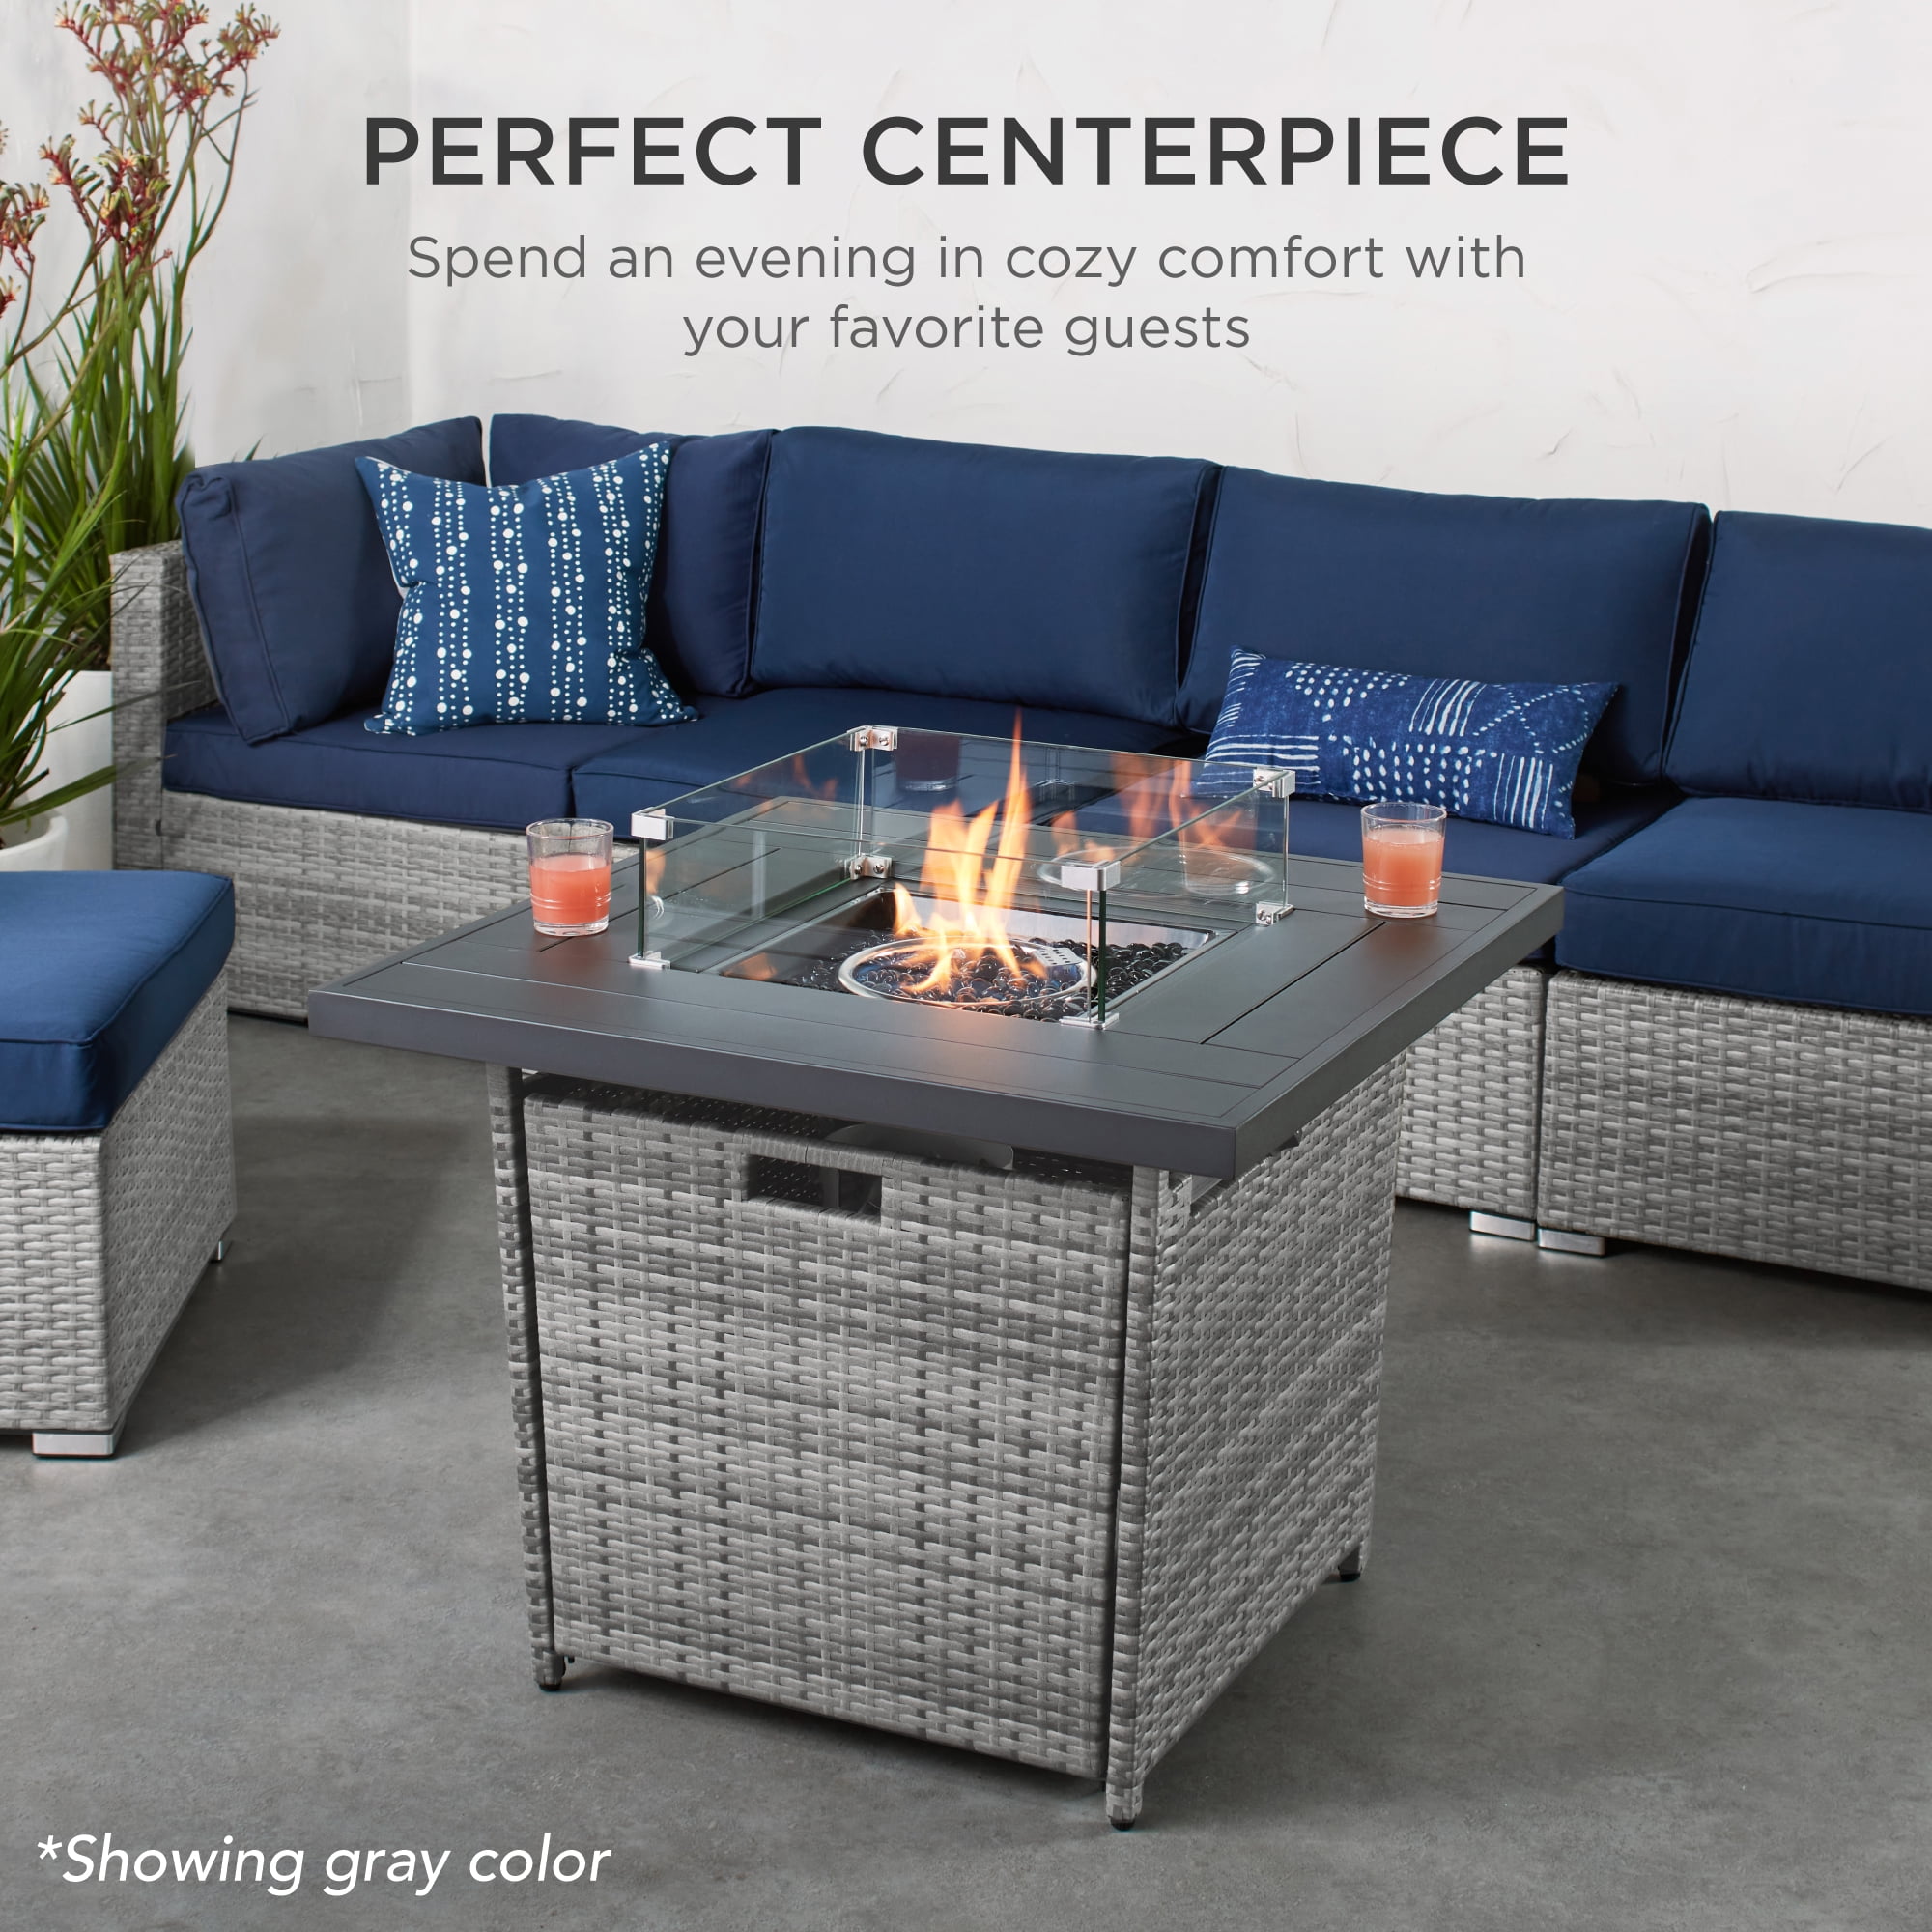 Aluminum Frame&PE Rattan Black Tempered Glass Tabletop & Blue Glass Stone 50,000 BTU Auto-Ignition Gas Firepit with Glass Wind Guard U-MAX 32in Outdoor Propane Gas Fire Pit Table CSA Certification 